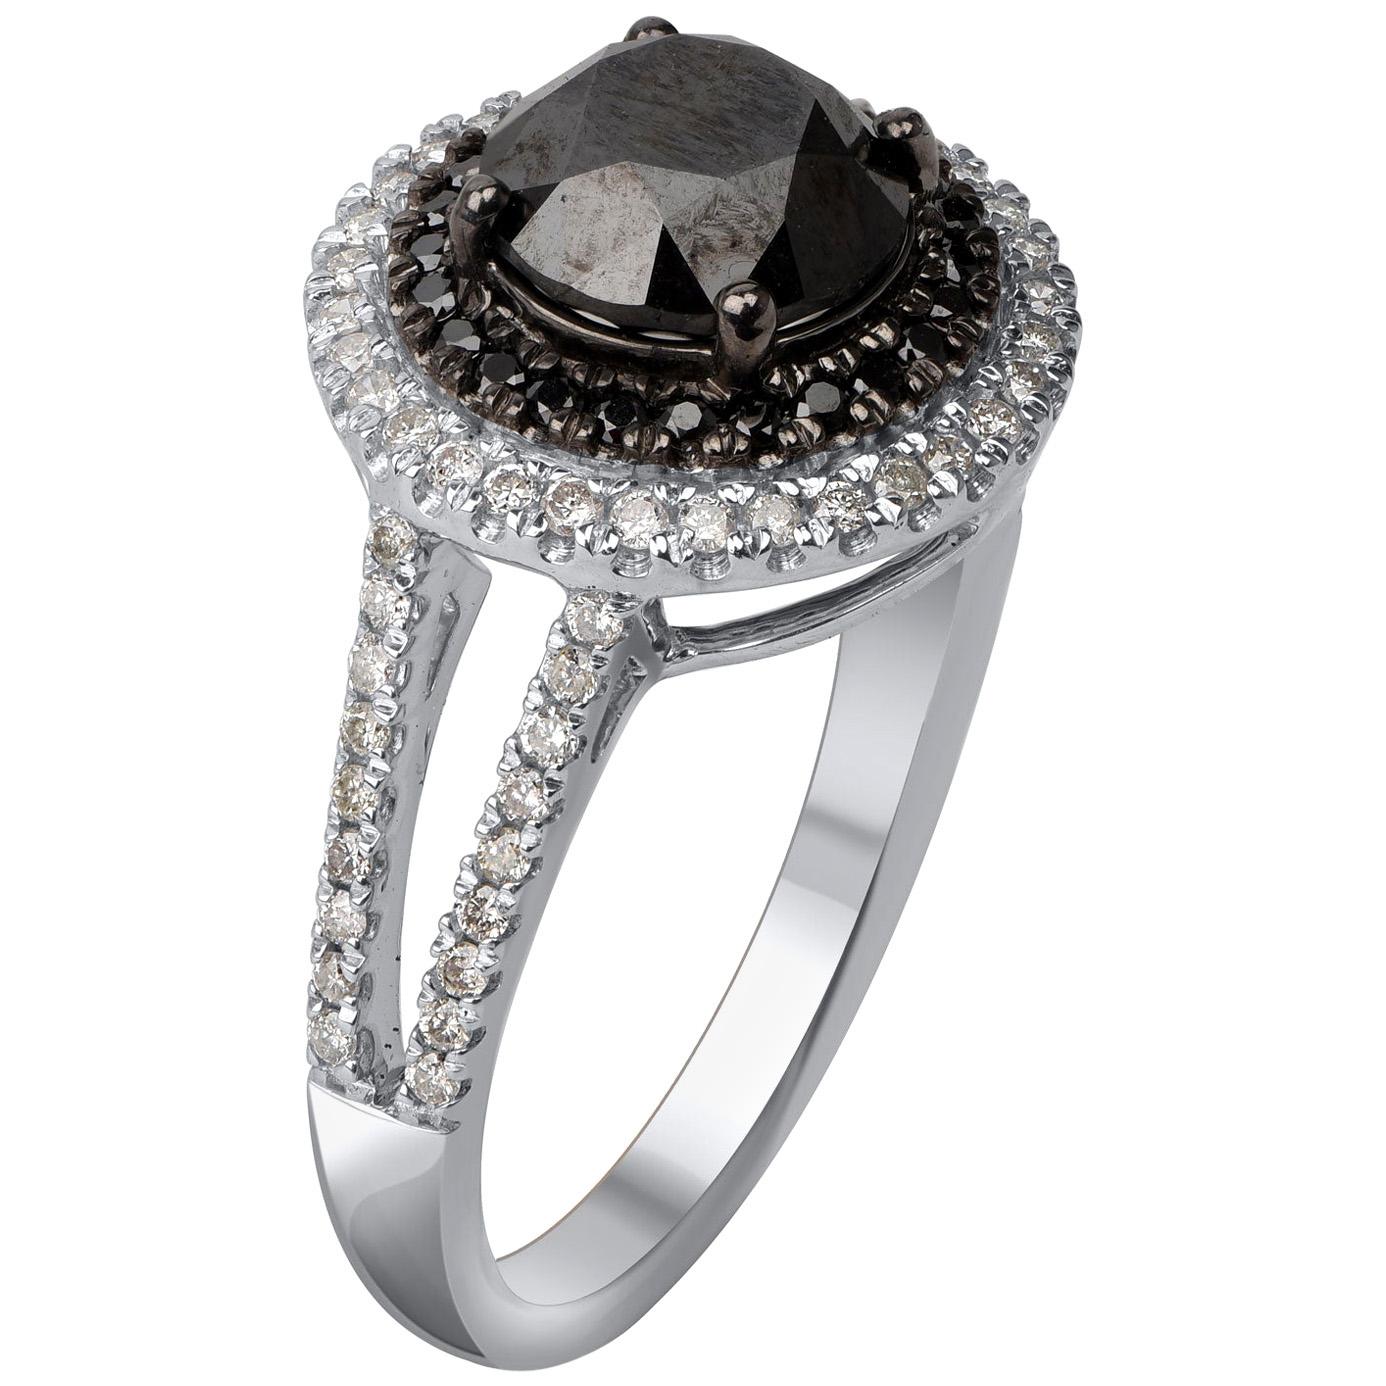 Crafted in 14-karat white gold and studded with 69 brilliant white and 25 black diamonds in prong setting. A unique choice that looks elegant as well as stunning. 

This style is Made to Order - please allow three weeks for manufacturing. It can be